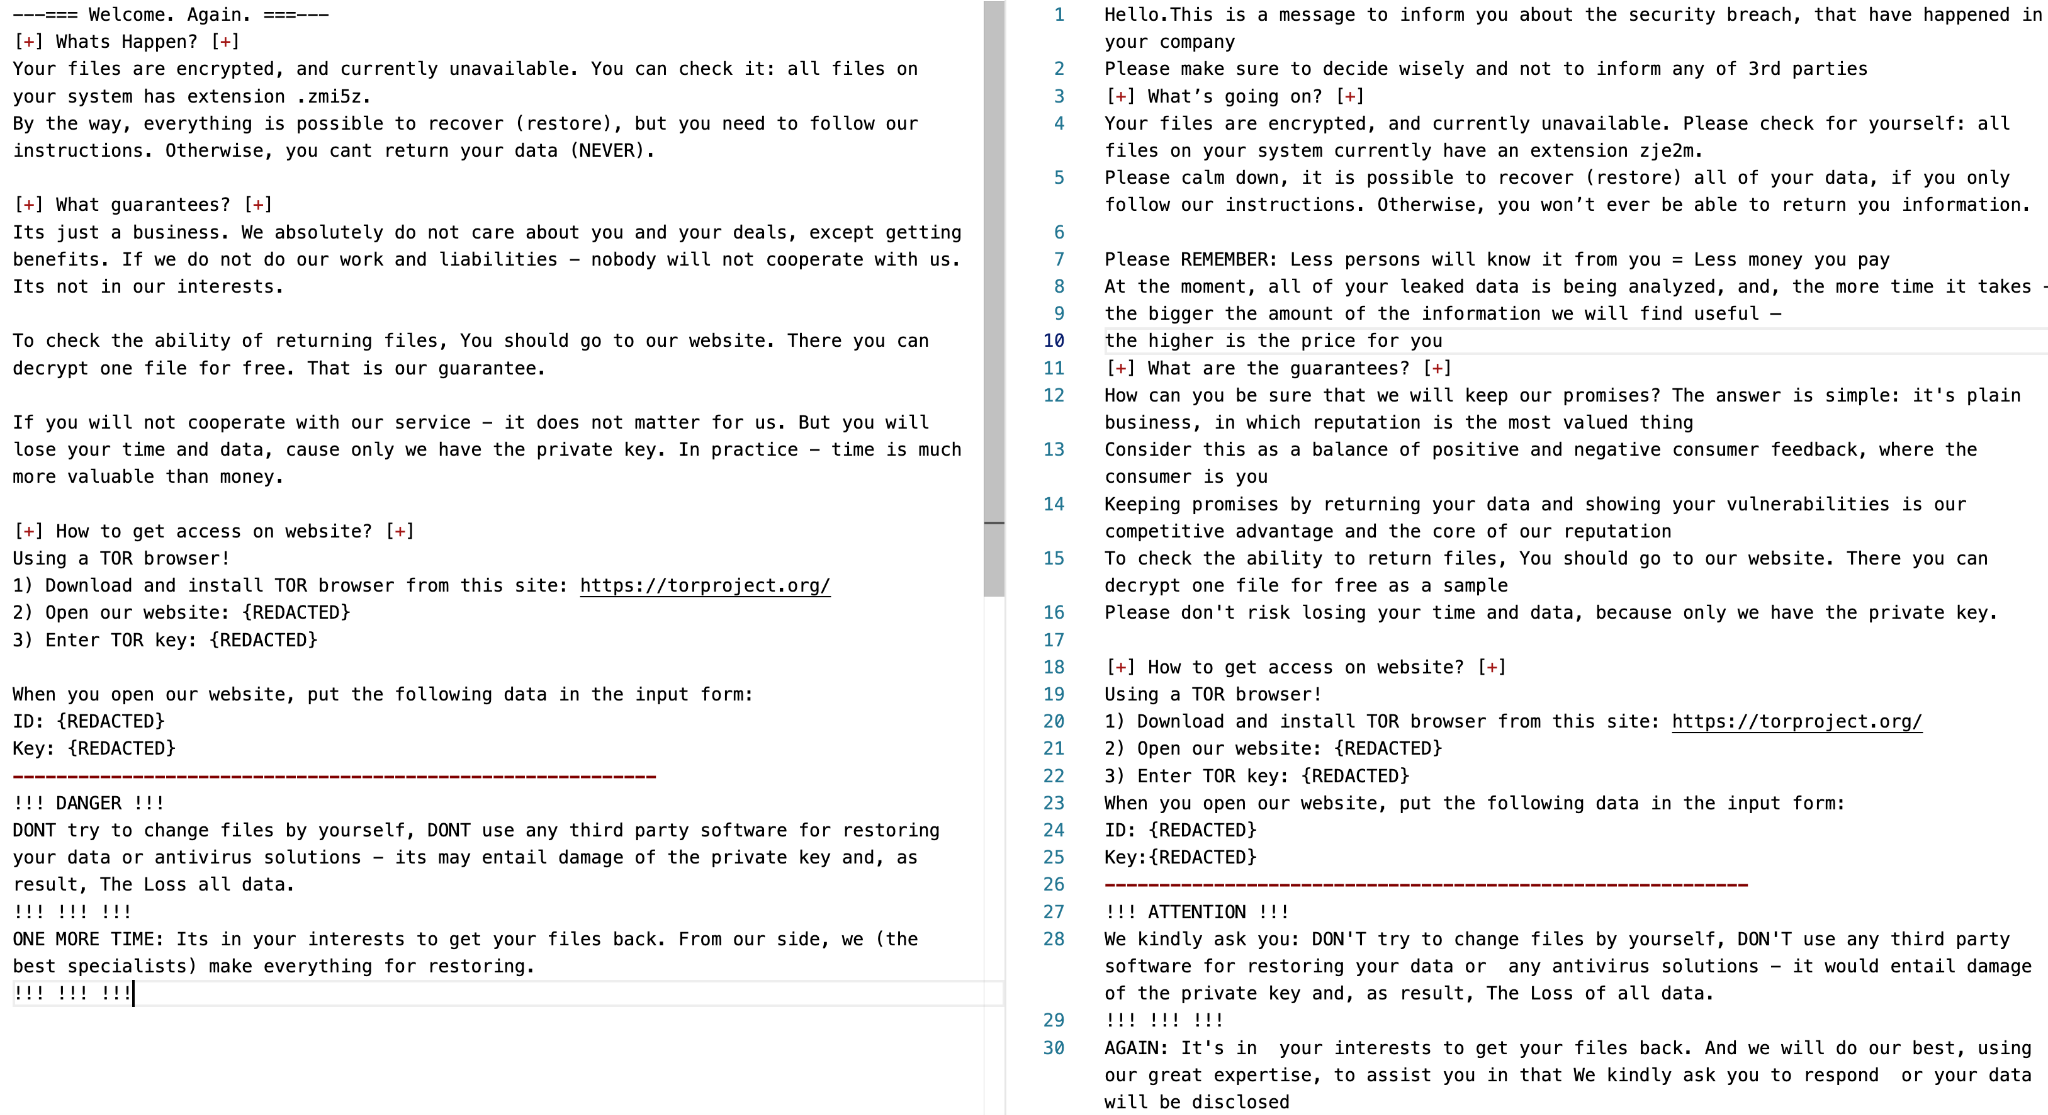 Side by side comparison of two Ransom Cartel notes. The note on the left, first observed January 2022, and includes the following sections: What's Happen, What Guarantee, How to get access on website? A section at the bottom titled "Danger" warns against attempting to restore data. The note on the left, first observed in August 2022, is longer and includes the following sections: What's going on?, What are the guarantees?, How to get access on website? A section at the bottom titled "Attention" warns against trying to restore data yourself. The note warns about involving third parties throughout. 